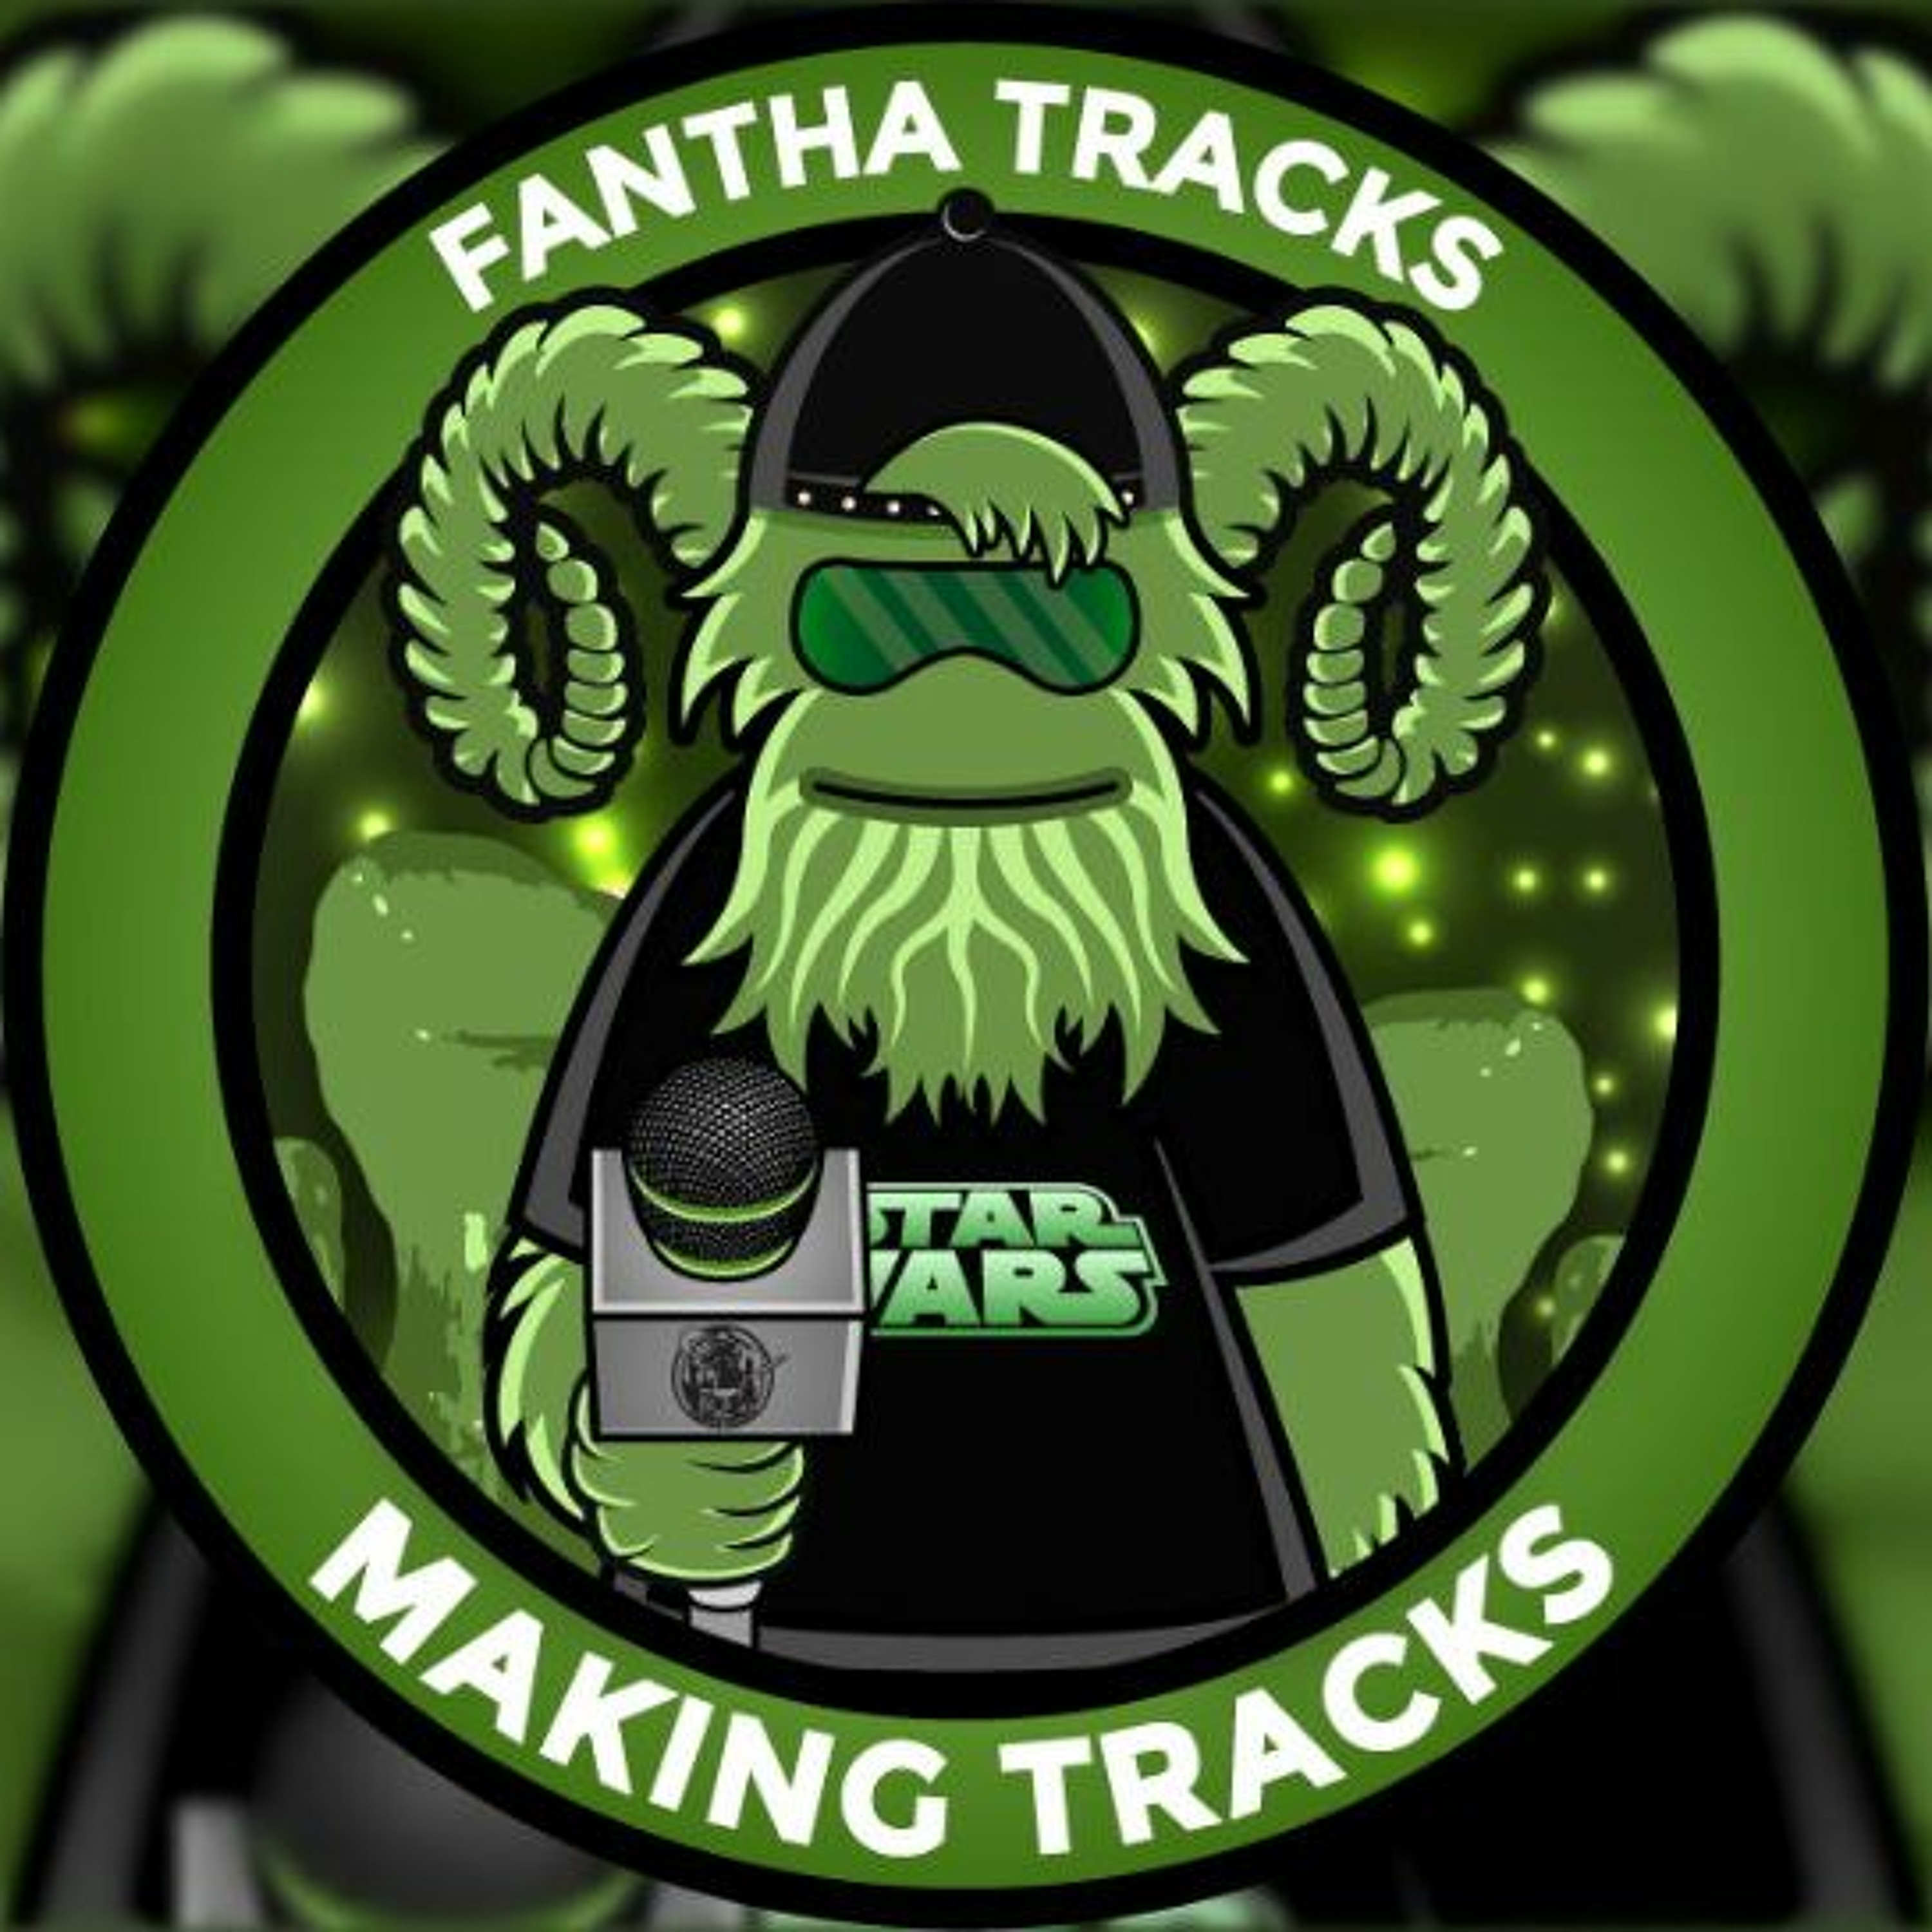 Making Tracks Episode 44: Go in with no expectations